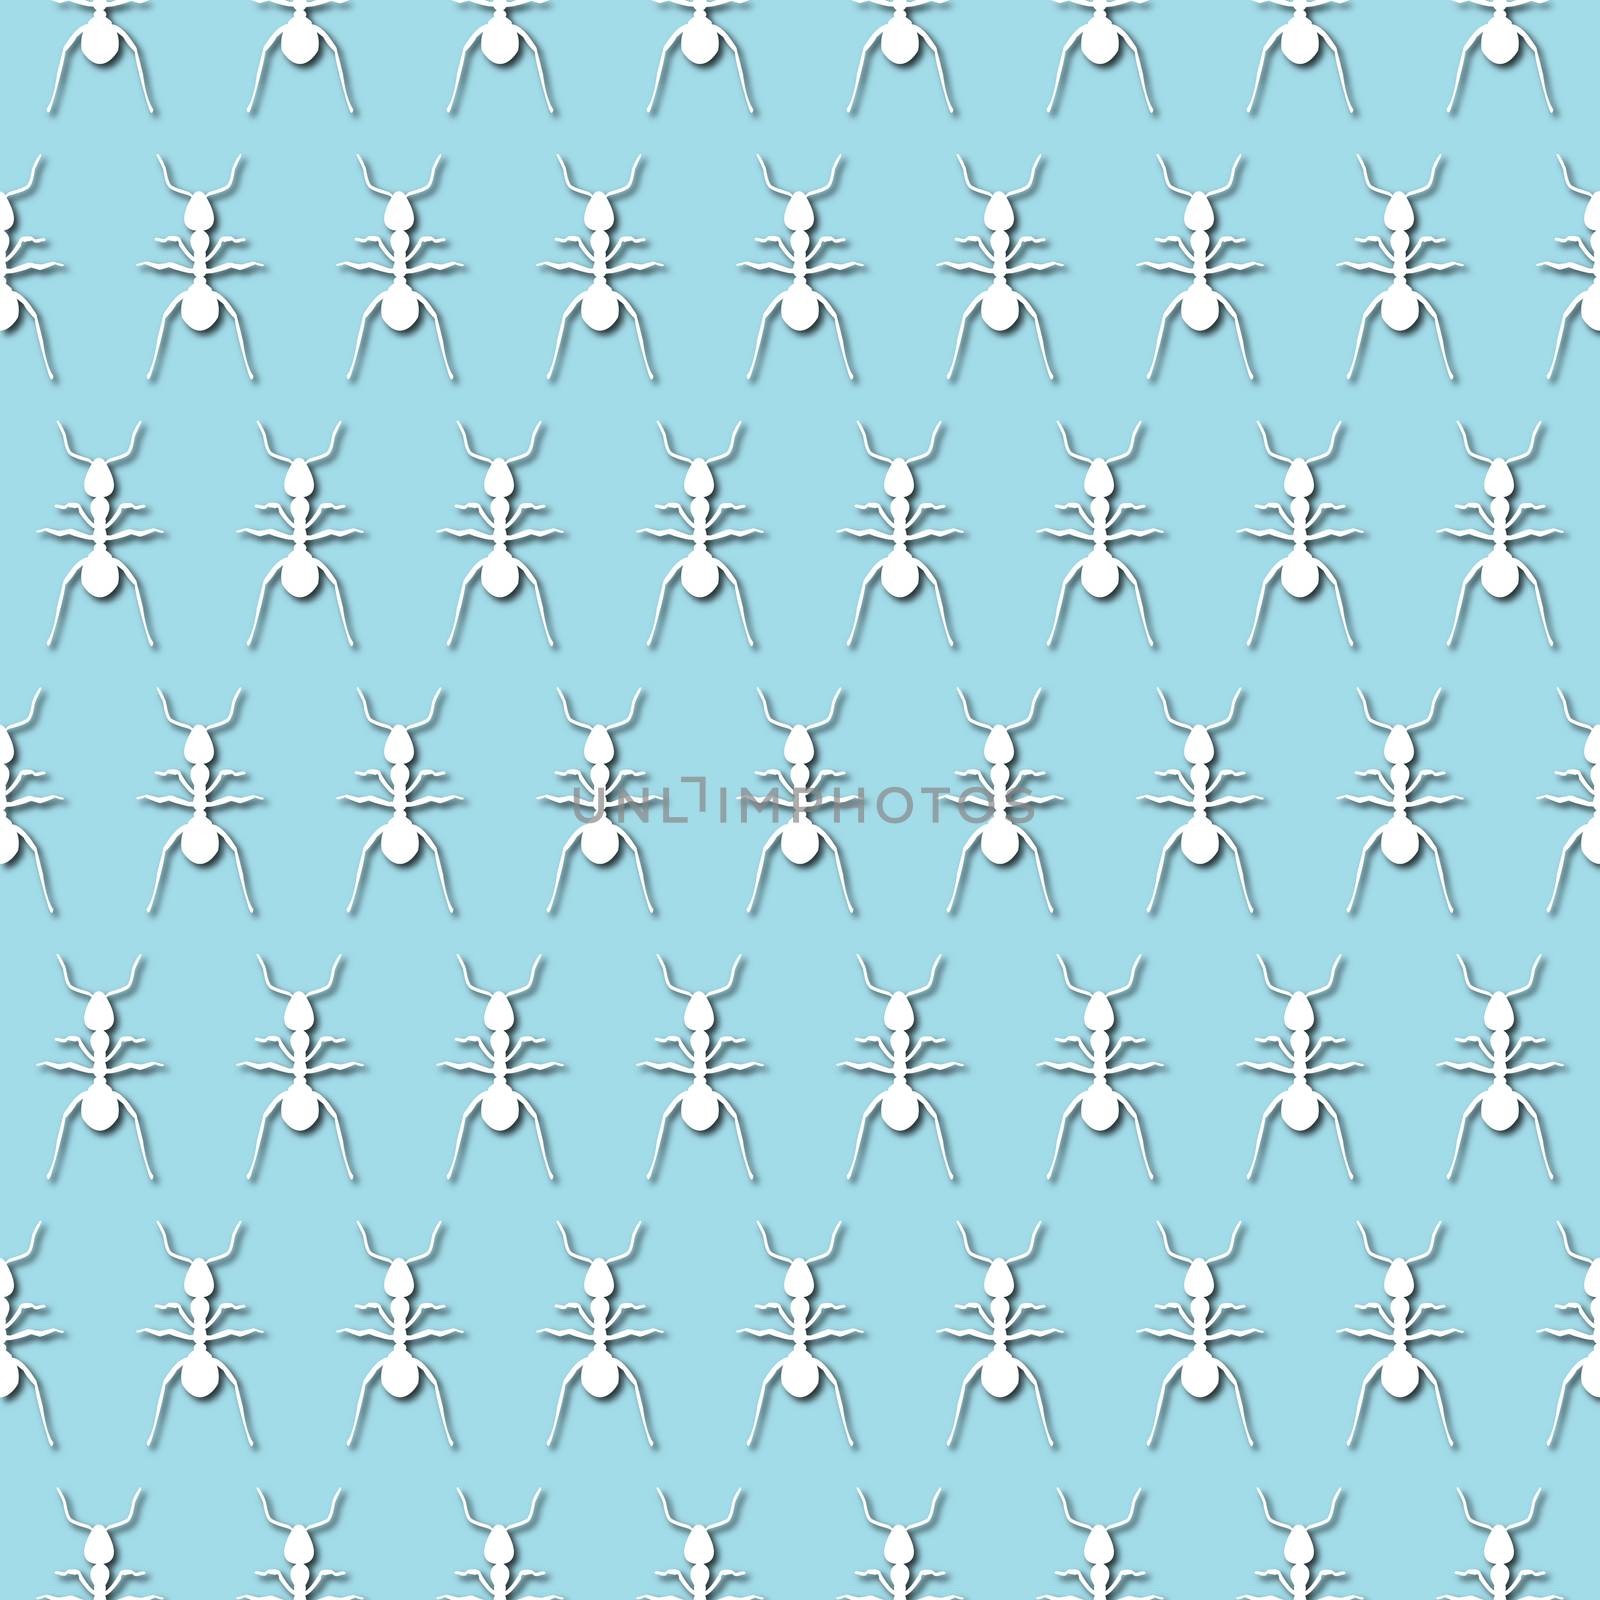 White ant, emmet, pismire silhouette on pale blue background, seamless pattern. Paper cut style by Pashchenko